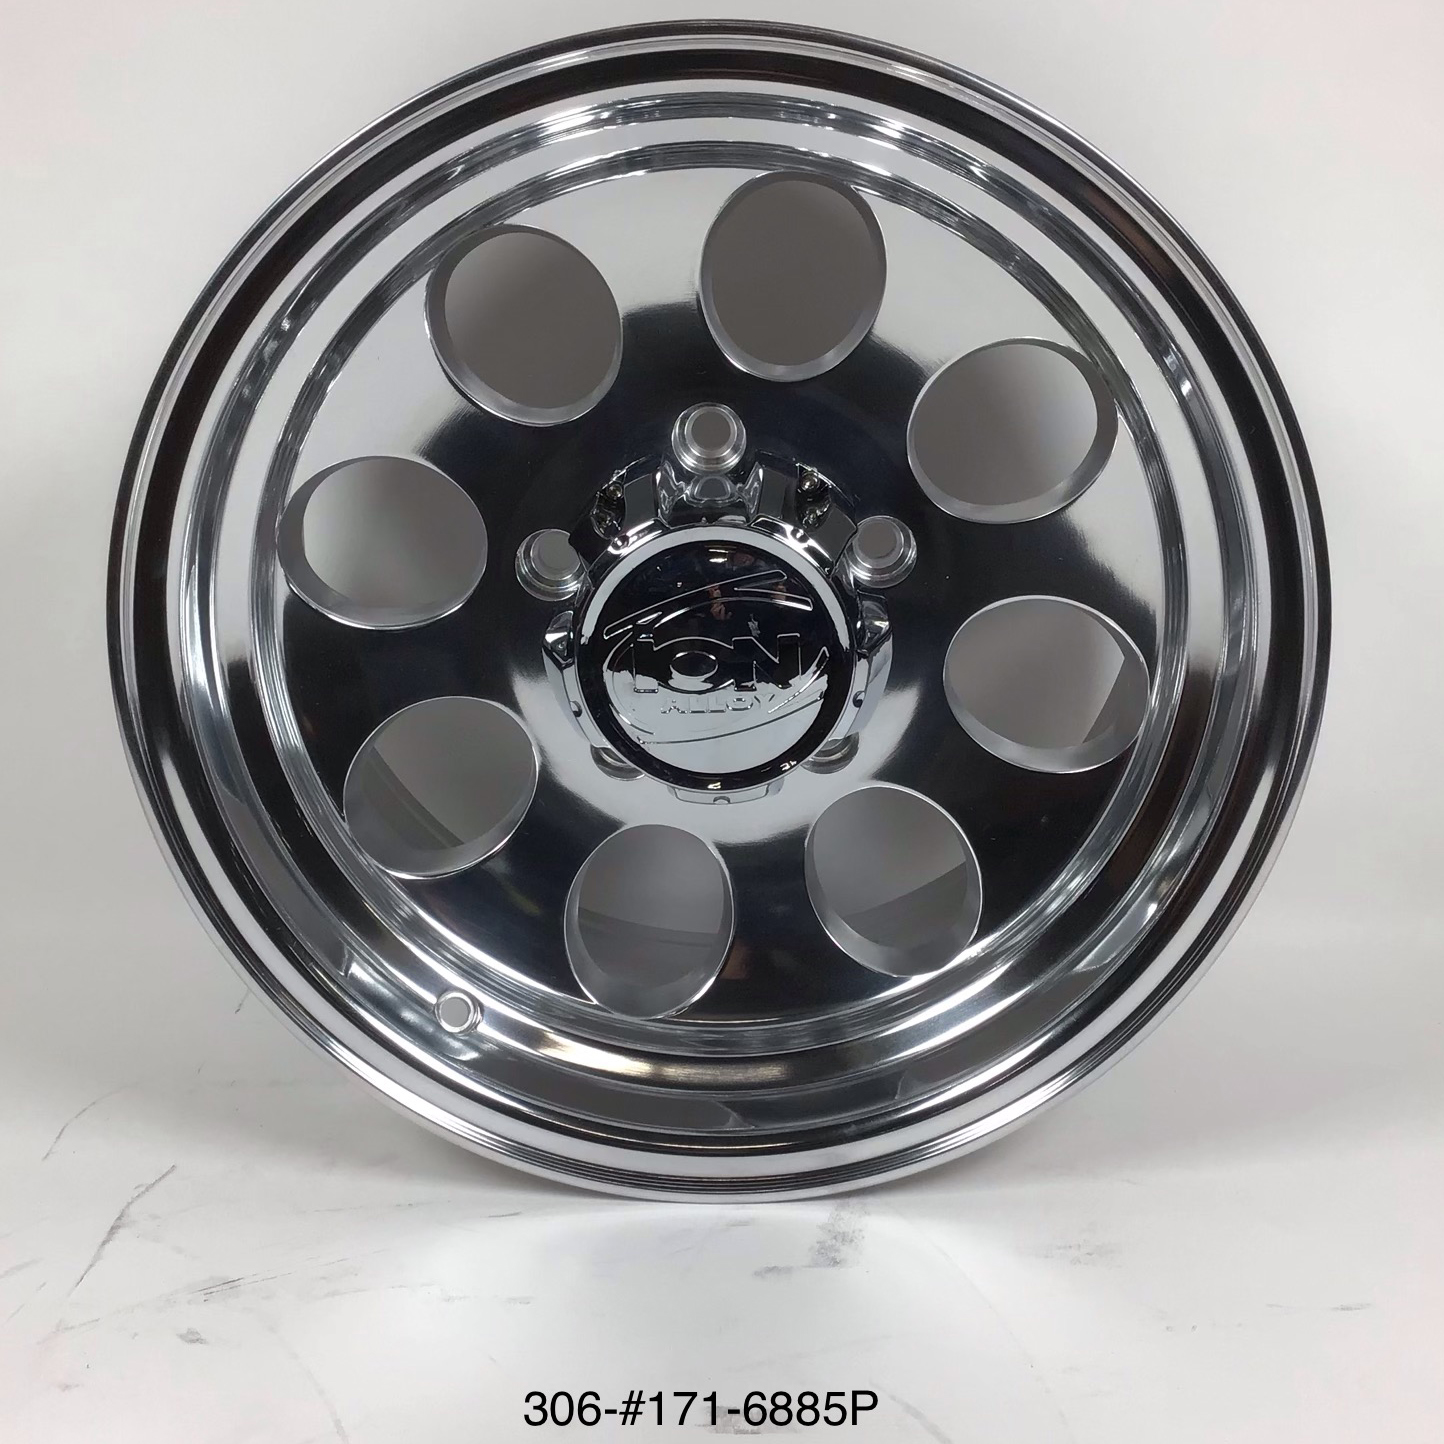 *BLEMISHED* Ion 171 Series Wheel Size: 16" x 8"